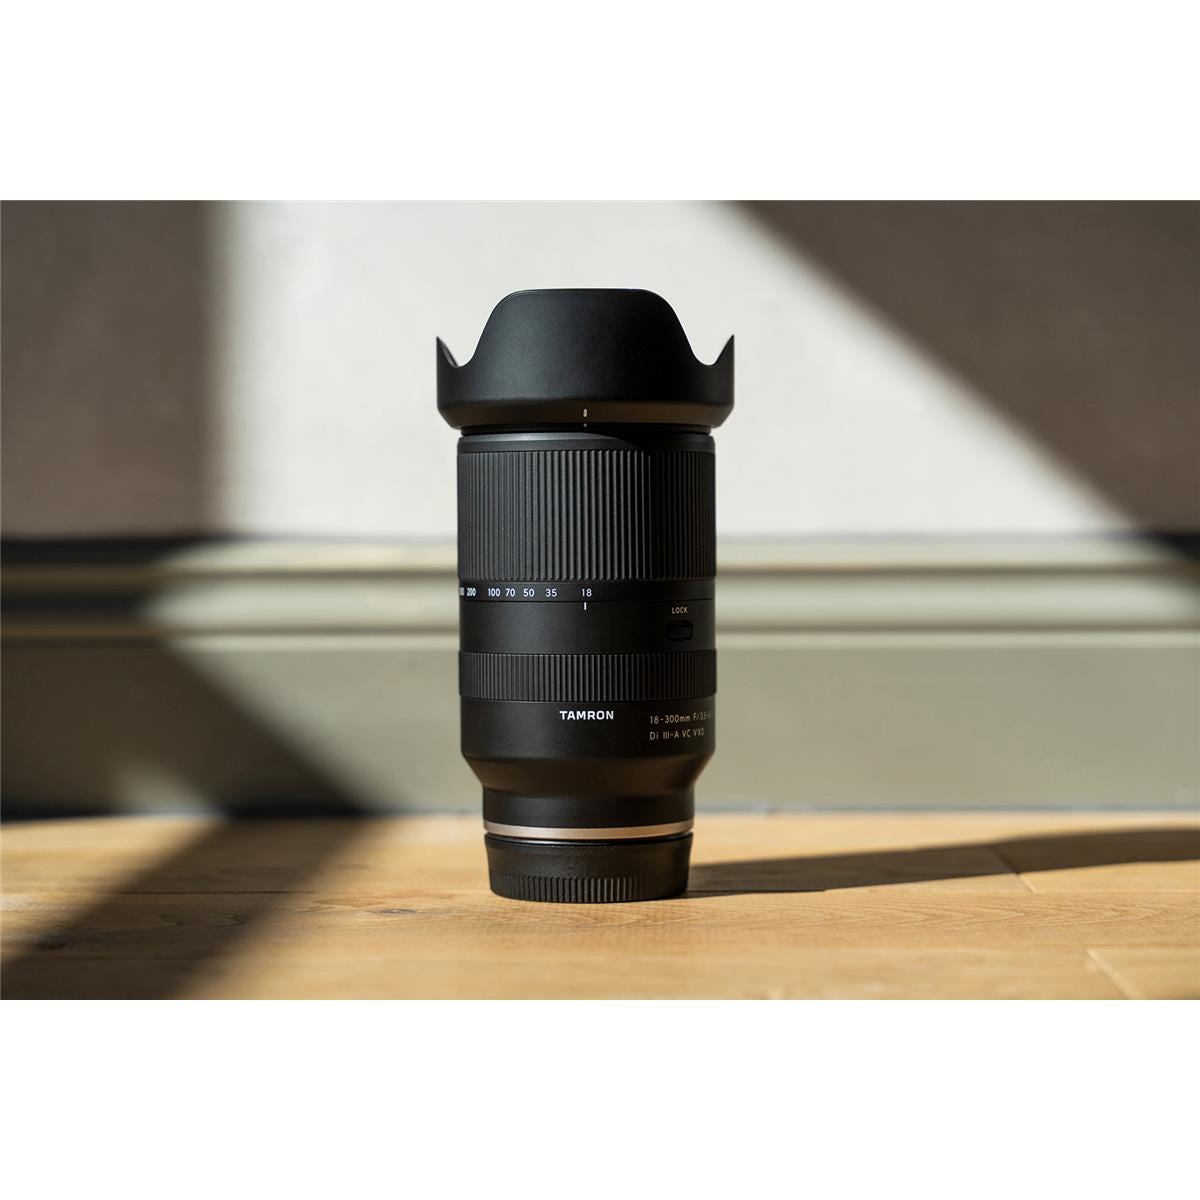 Tamron 18-300mm f/3.5-6.3 Di III-A VC VXD Lens for Sony E AFB061S-700